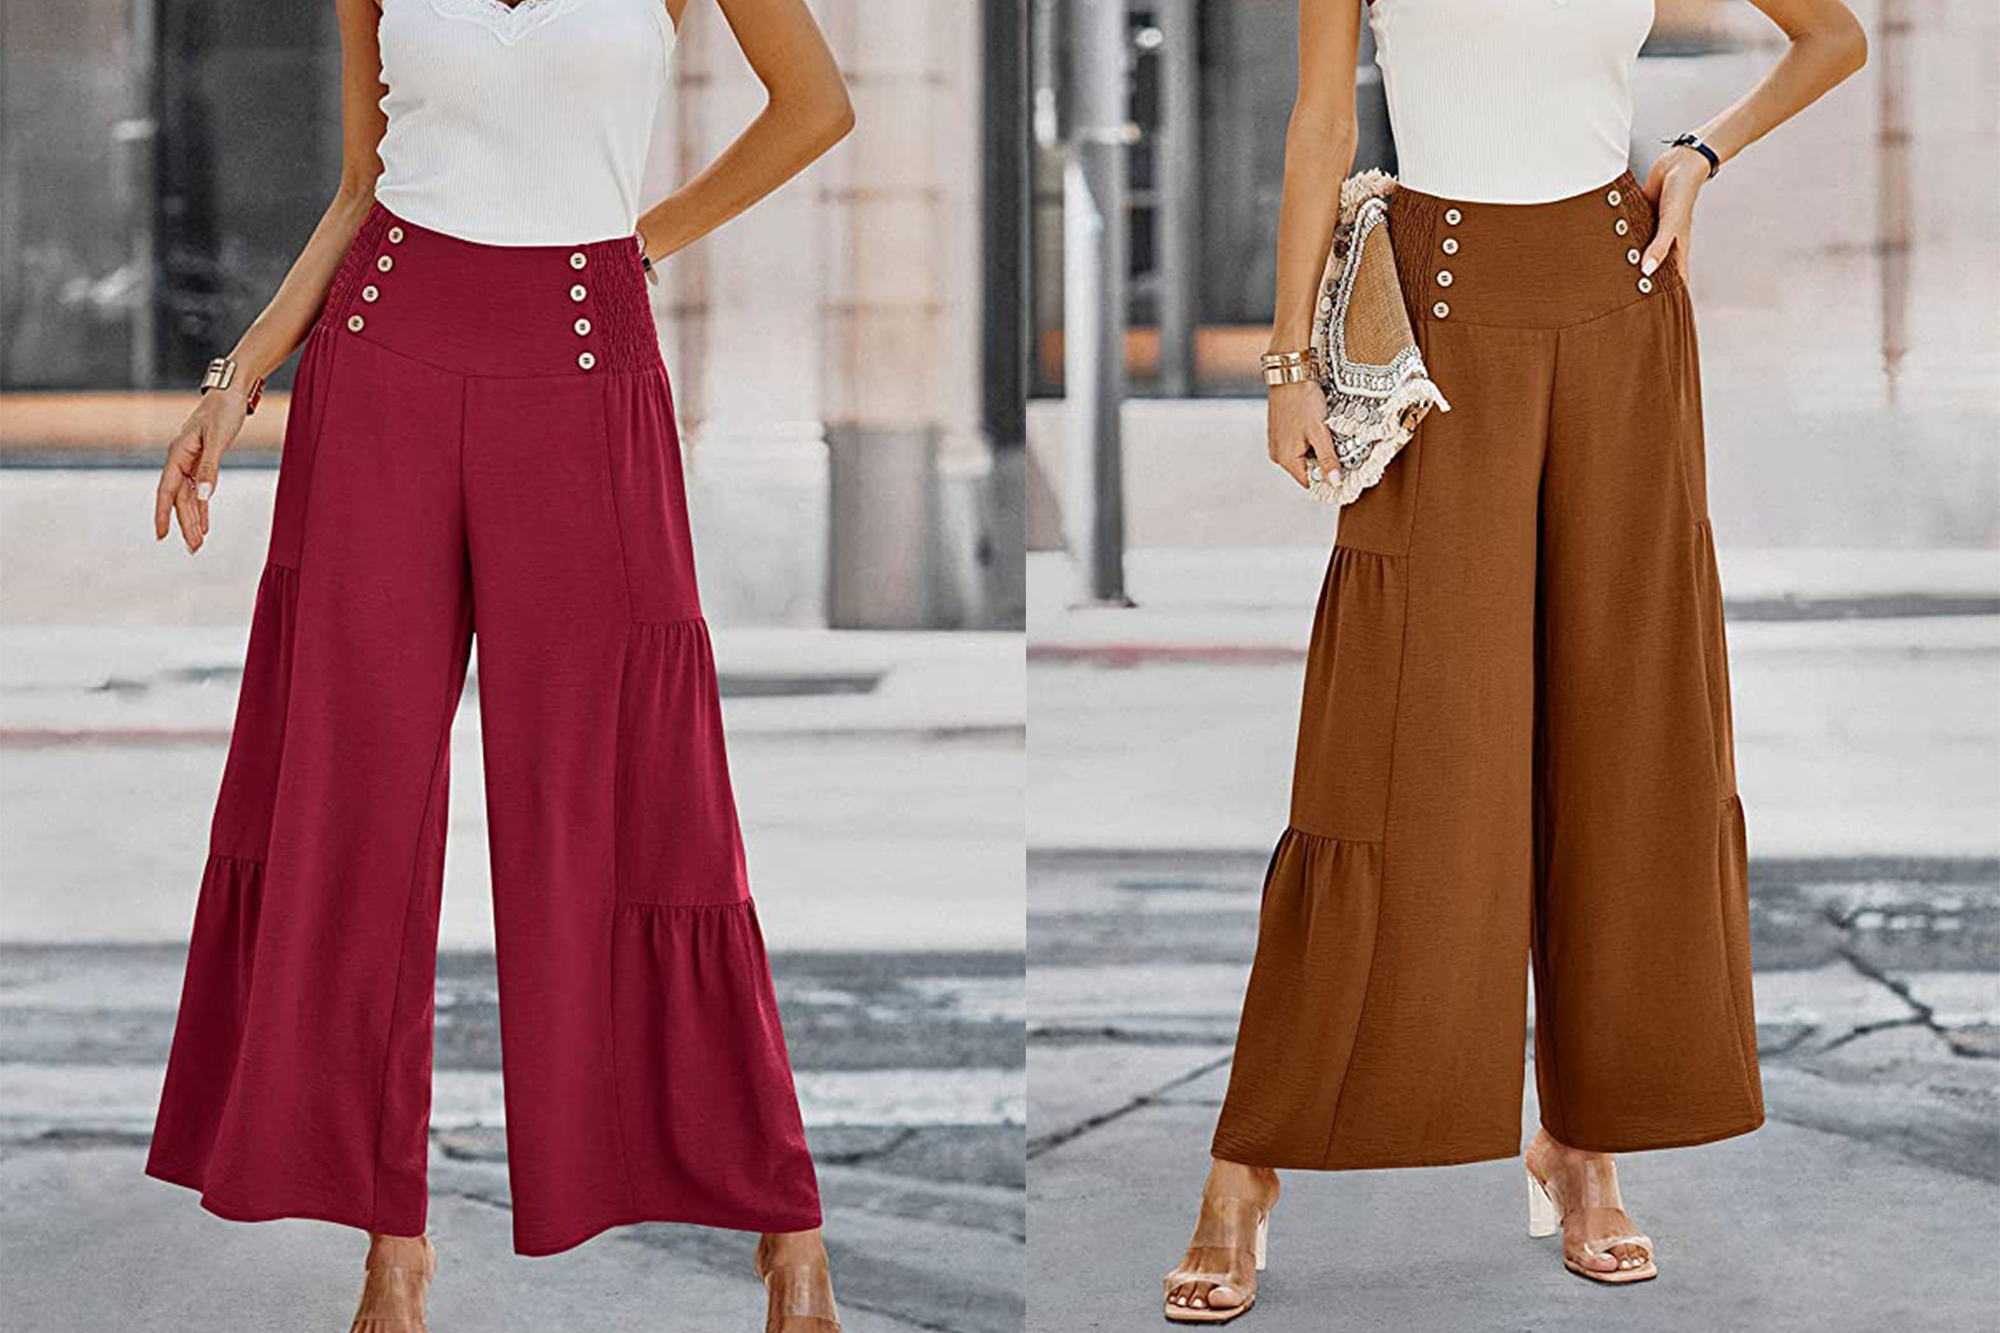 Autumn Palazzo High Waisted Palazzo Pants With Top For Women With